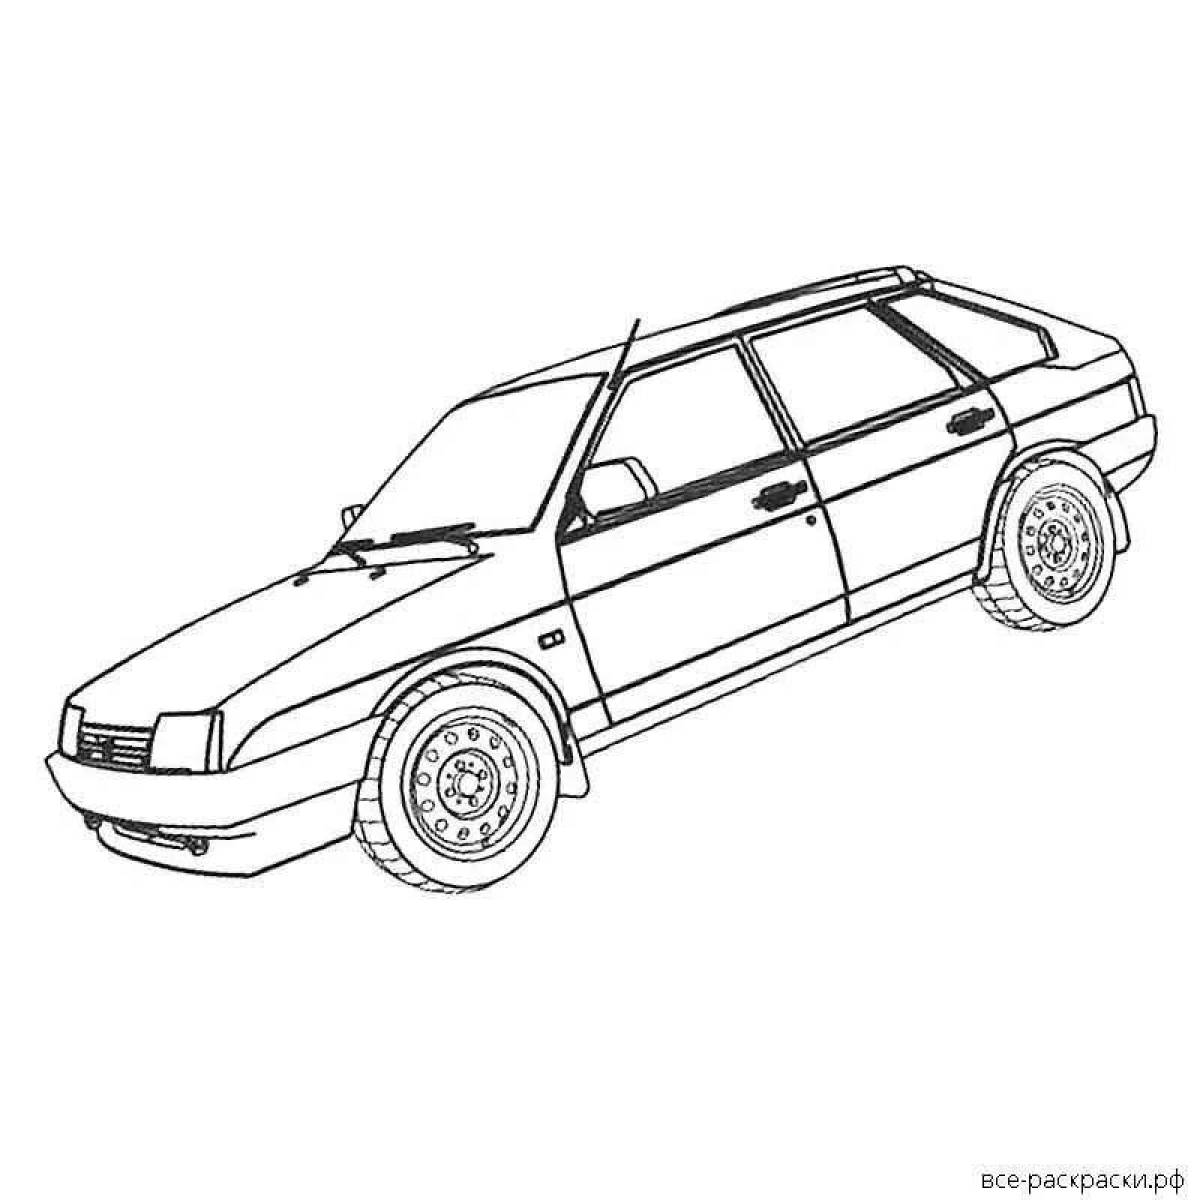 Mysterious vaz 2109 coloring book